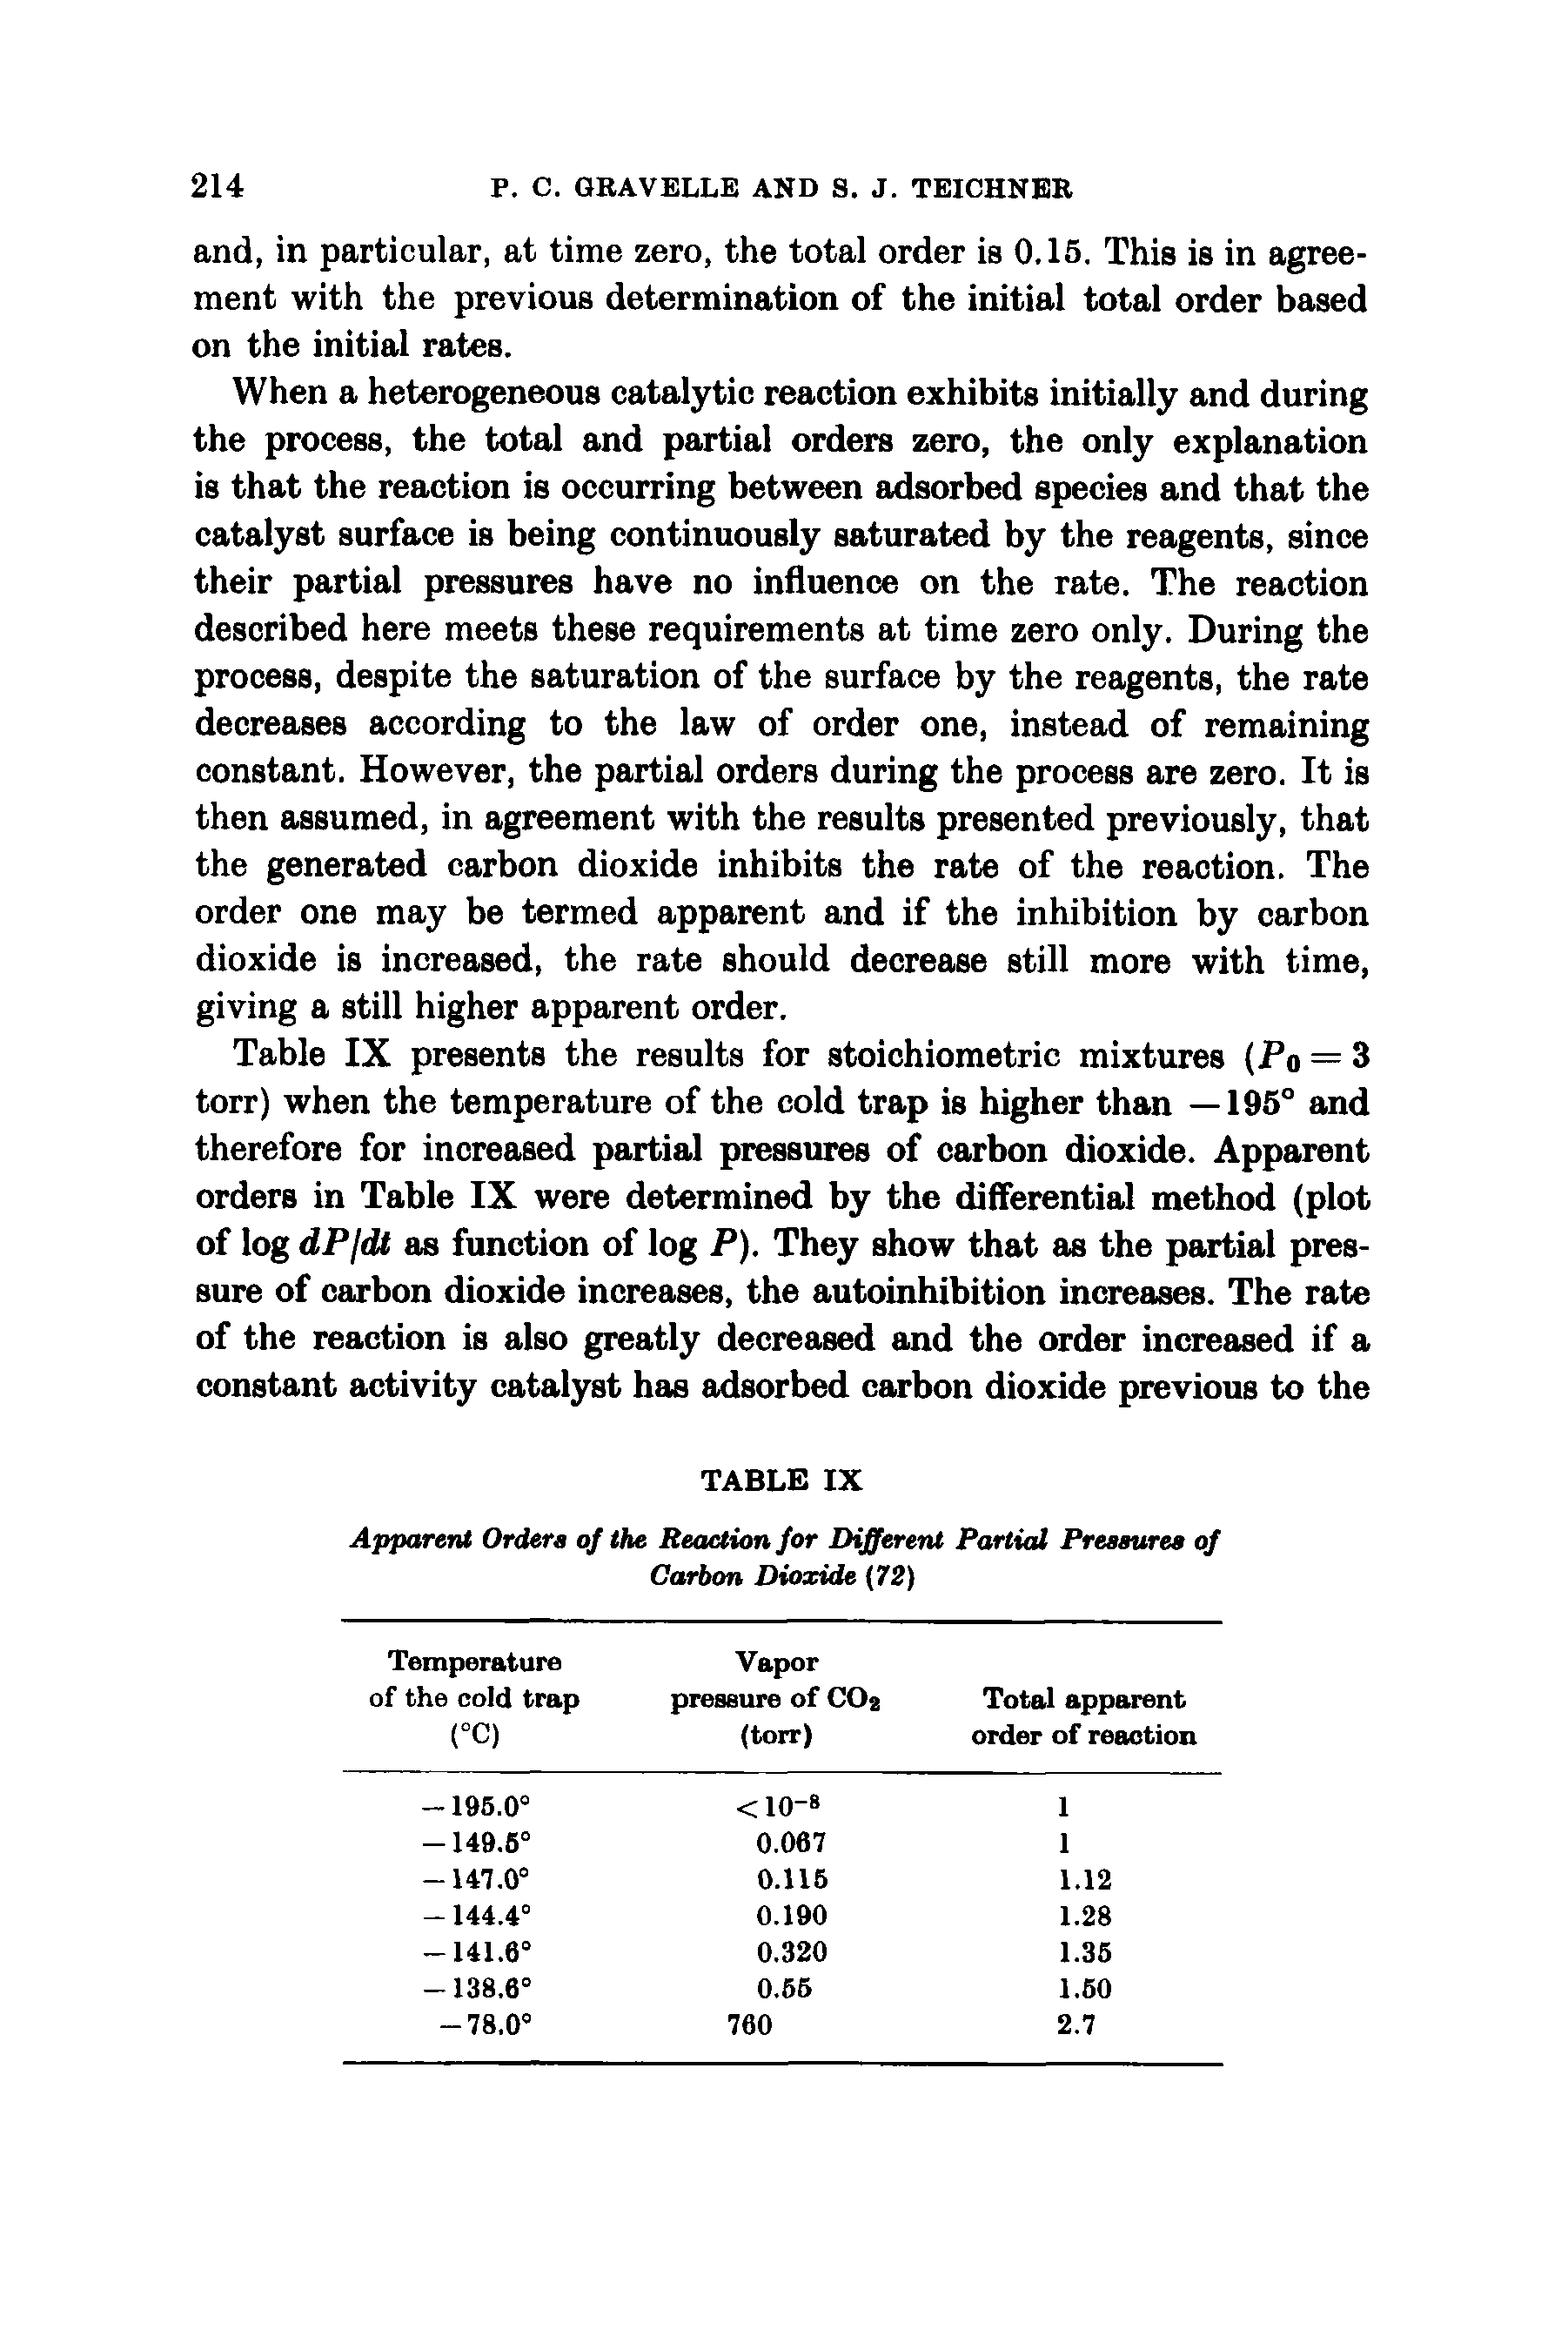 Table IX presents the results for stoichiometric mixtures (Po = 3 torr) when the temperature of the cold trap is higher than —195° and therefore for increased partial pressures of carbon dioxide. Apparent orders in Table IX were determined by the differential method (plot of log dPjdt as function of log P). They show that as the partial pressure of carbon dioxide increases, the autoinhibition increases. The rate of the reaction is also greatly decreased and the order increased if a constant activity catalyst has adsorbed carbon dioxide previous to the...